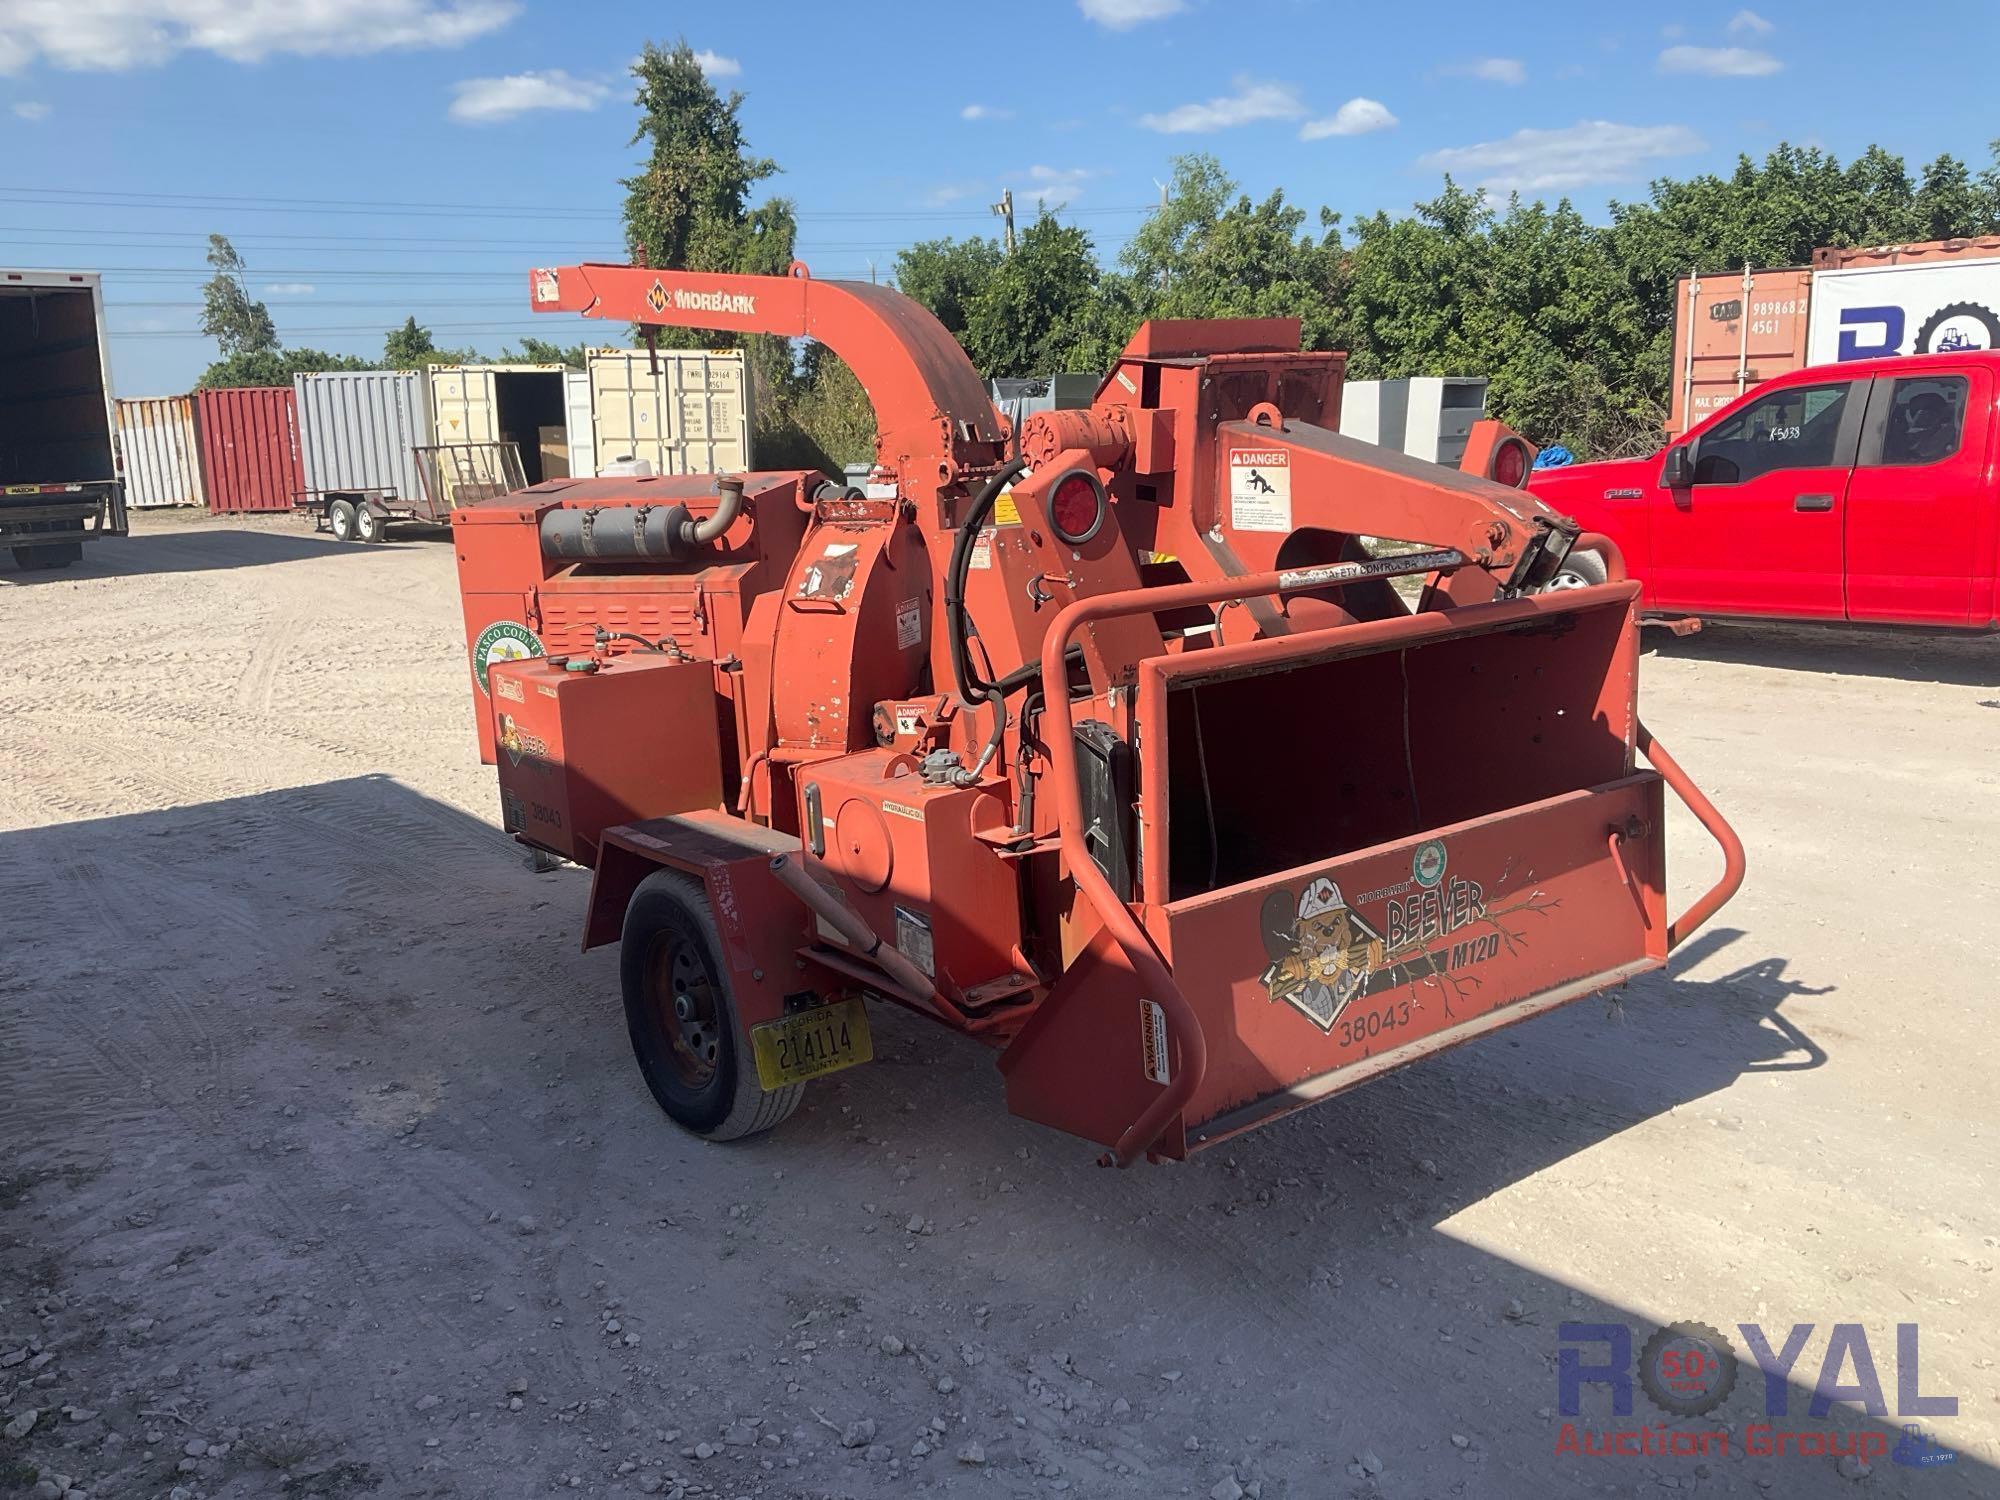 2013 Morbark Beevers M12D 12in Towable Wood Chipper